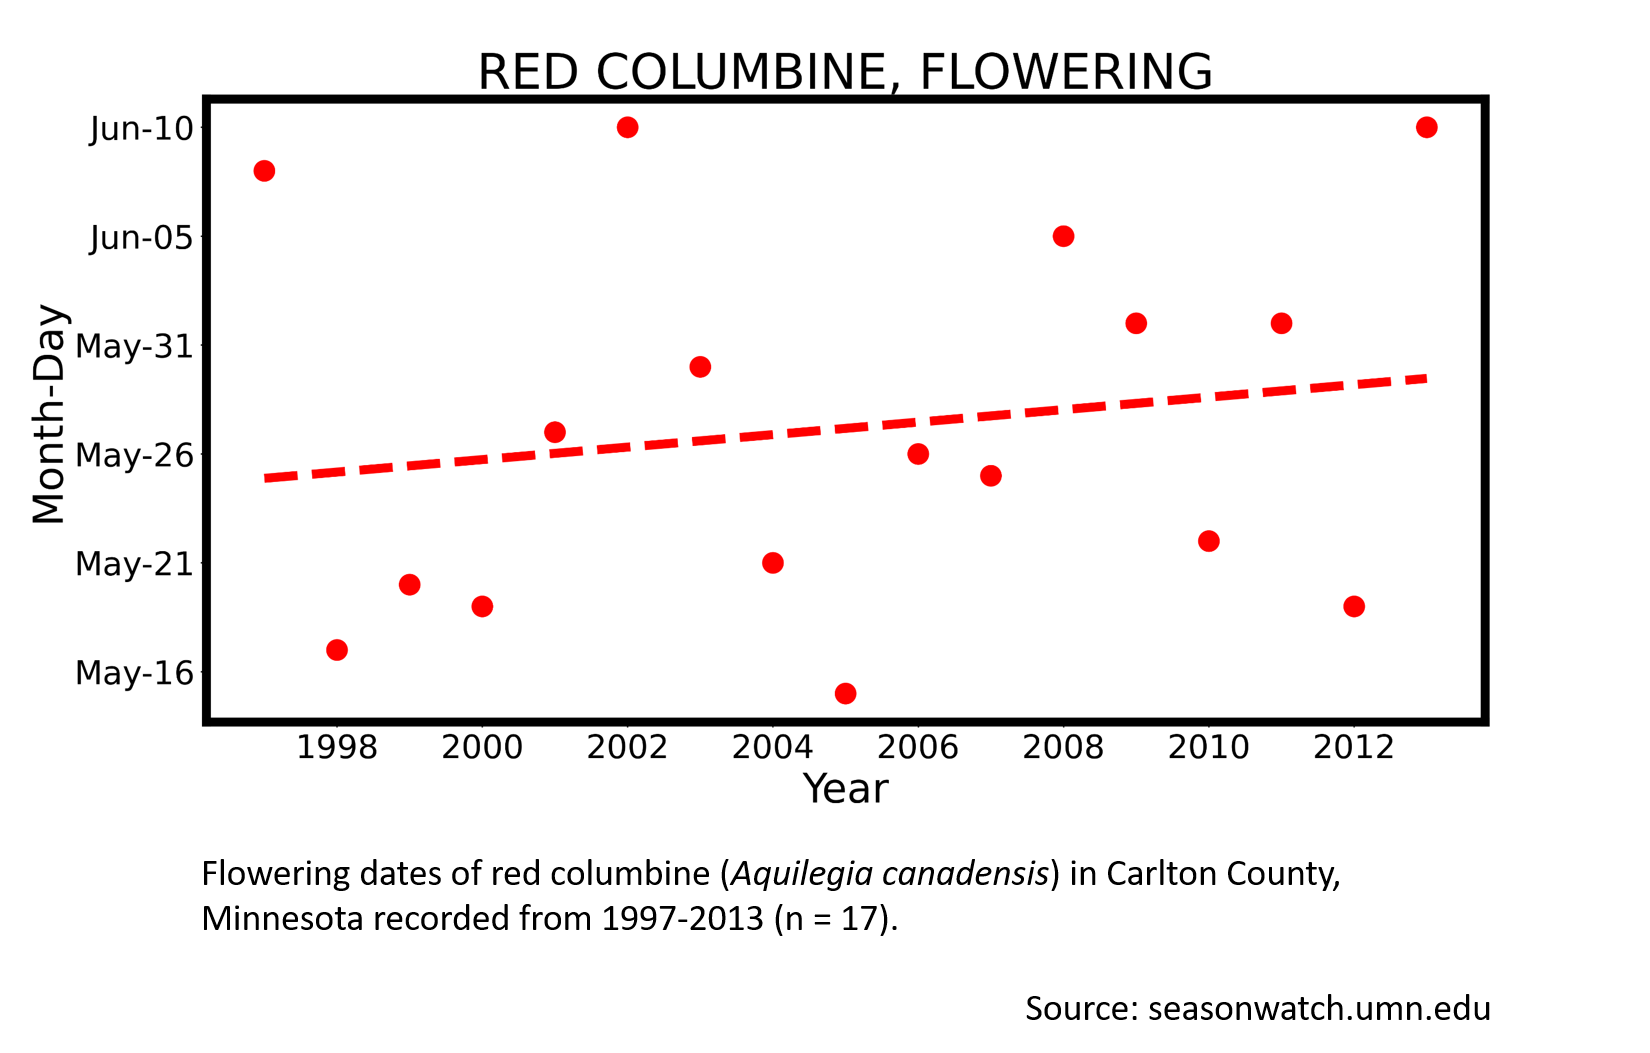 Scatterplot showing red colubmine phenology in Carlton County, Minnesota